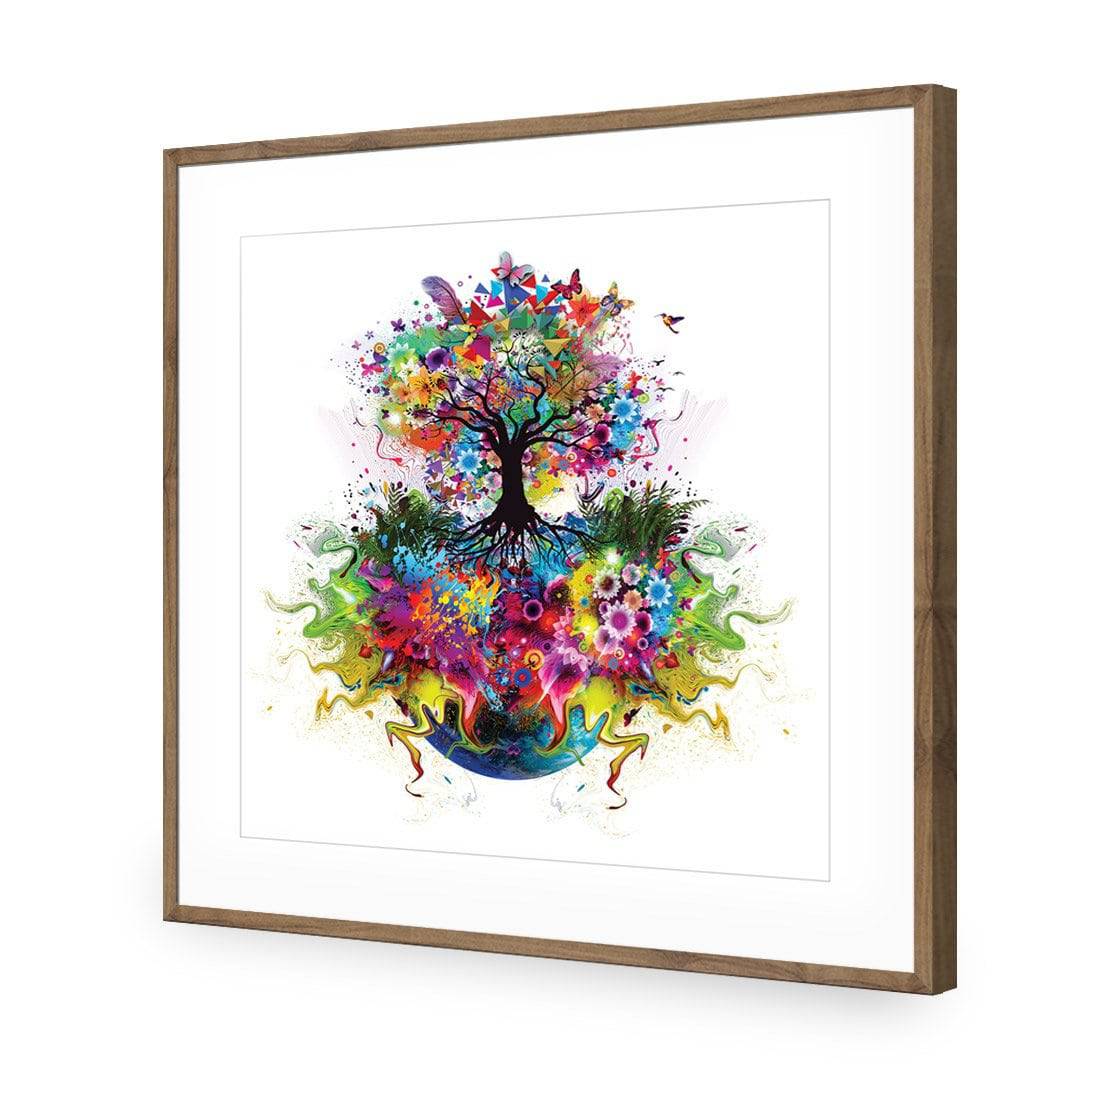 Flower Power, Square-Acrylic-Wall Art Design-With Border-Acrylic - Natural Frame-37x37cm-Wall Art Designs